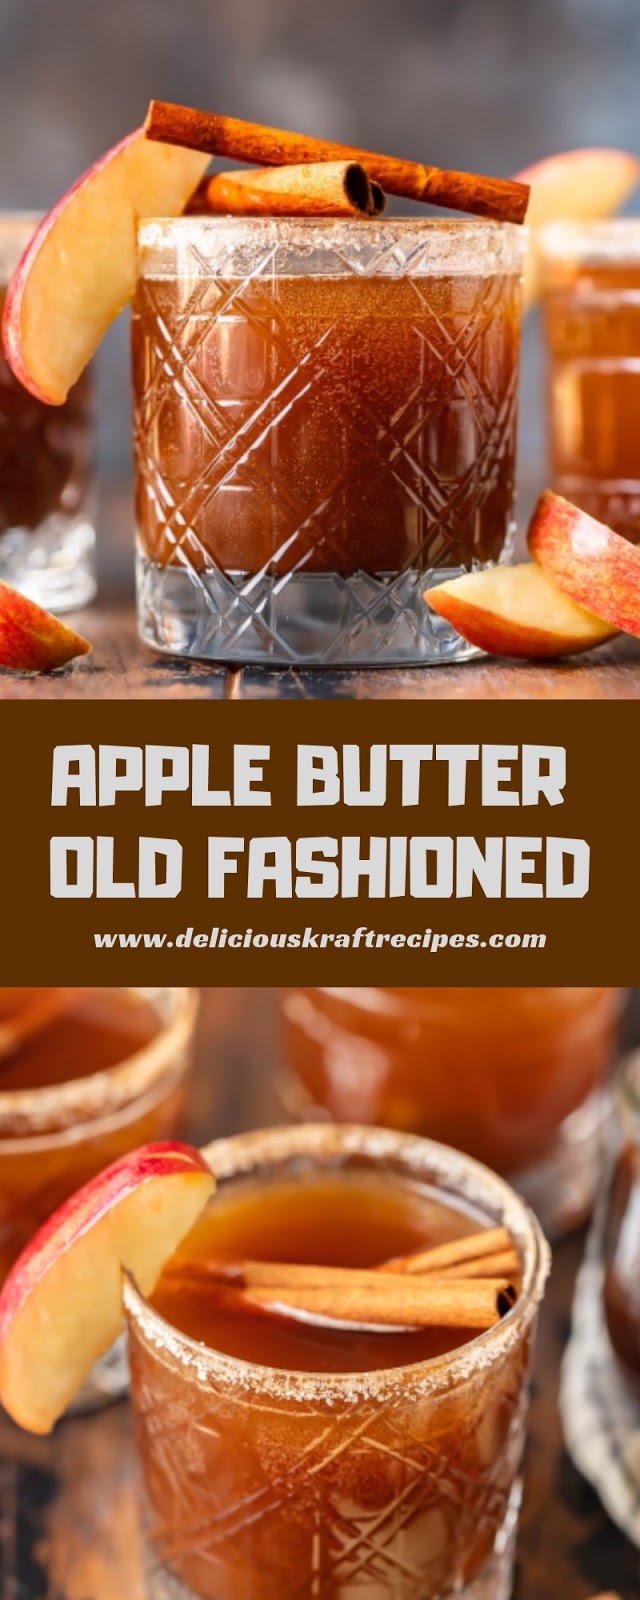 APPLE BUTTER OLD FASHIONED